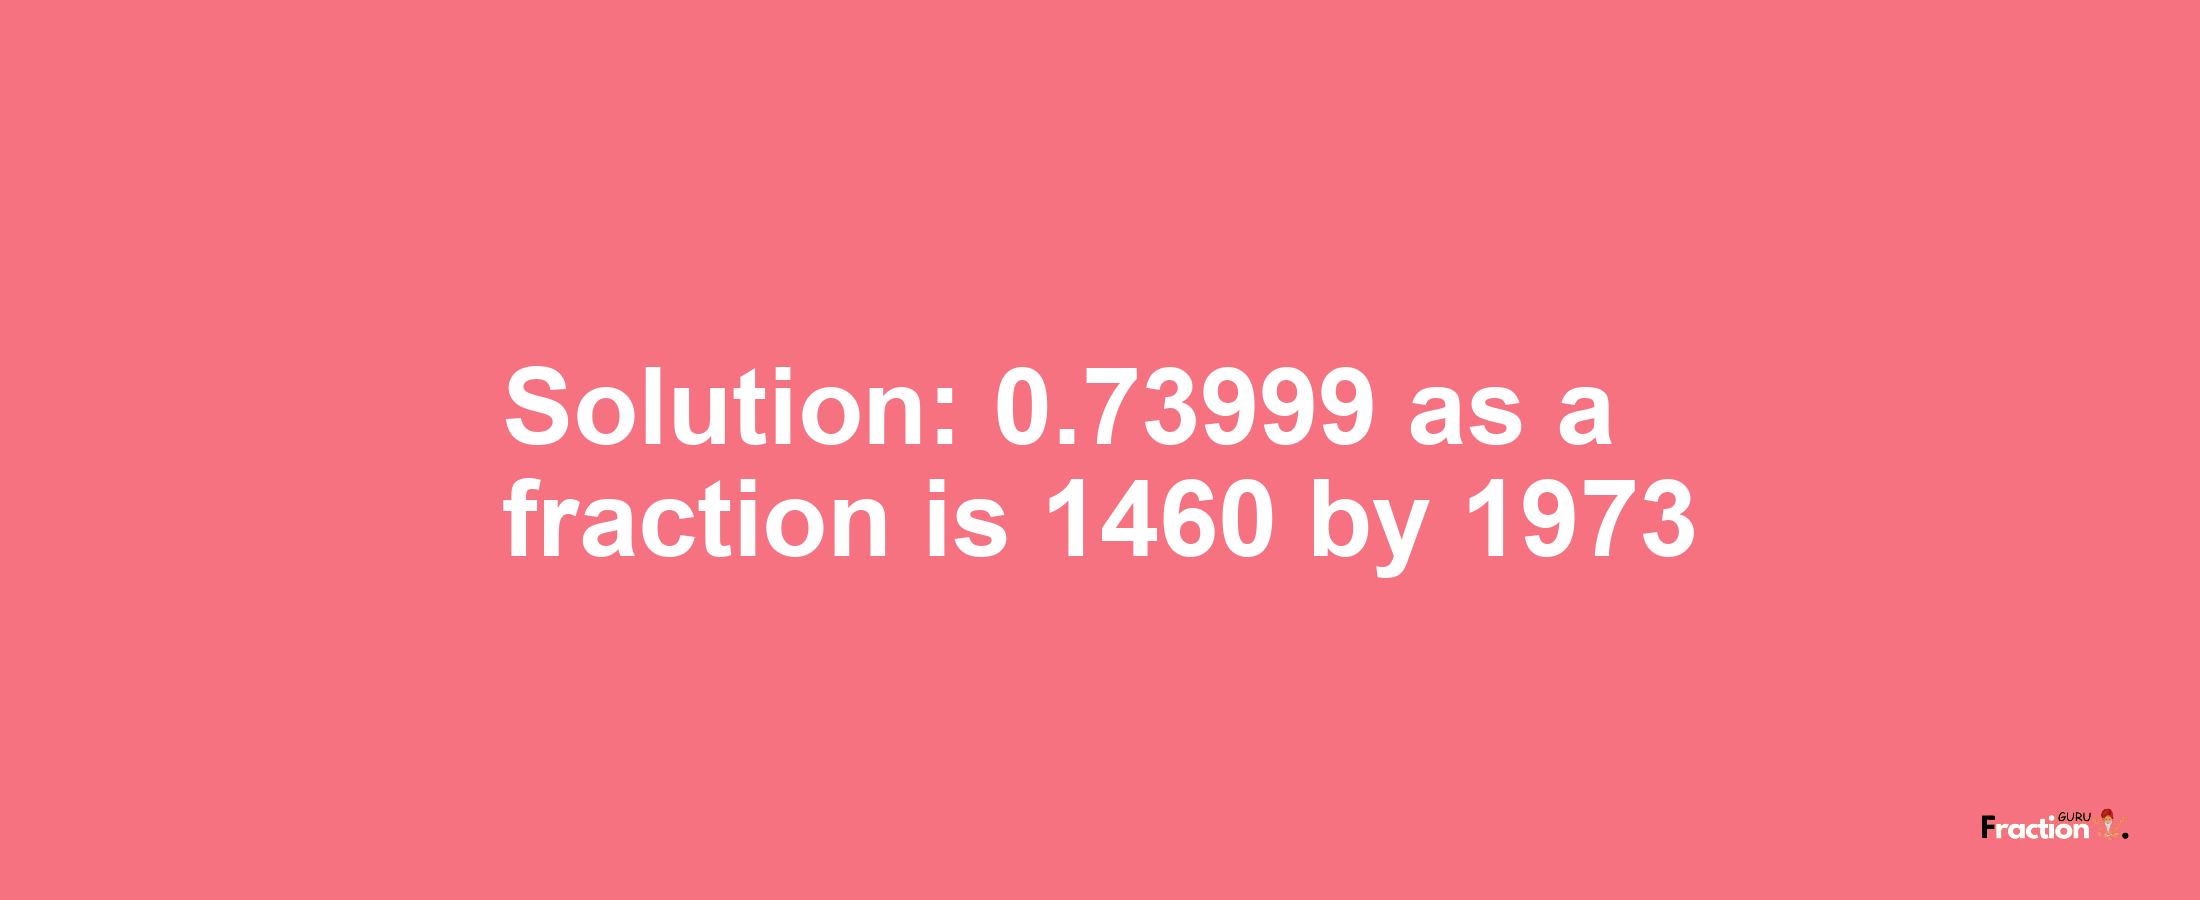 Solution:0.73999 as a fraction is 1460/1973